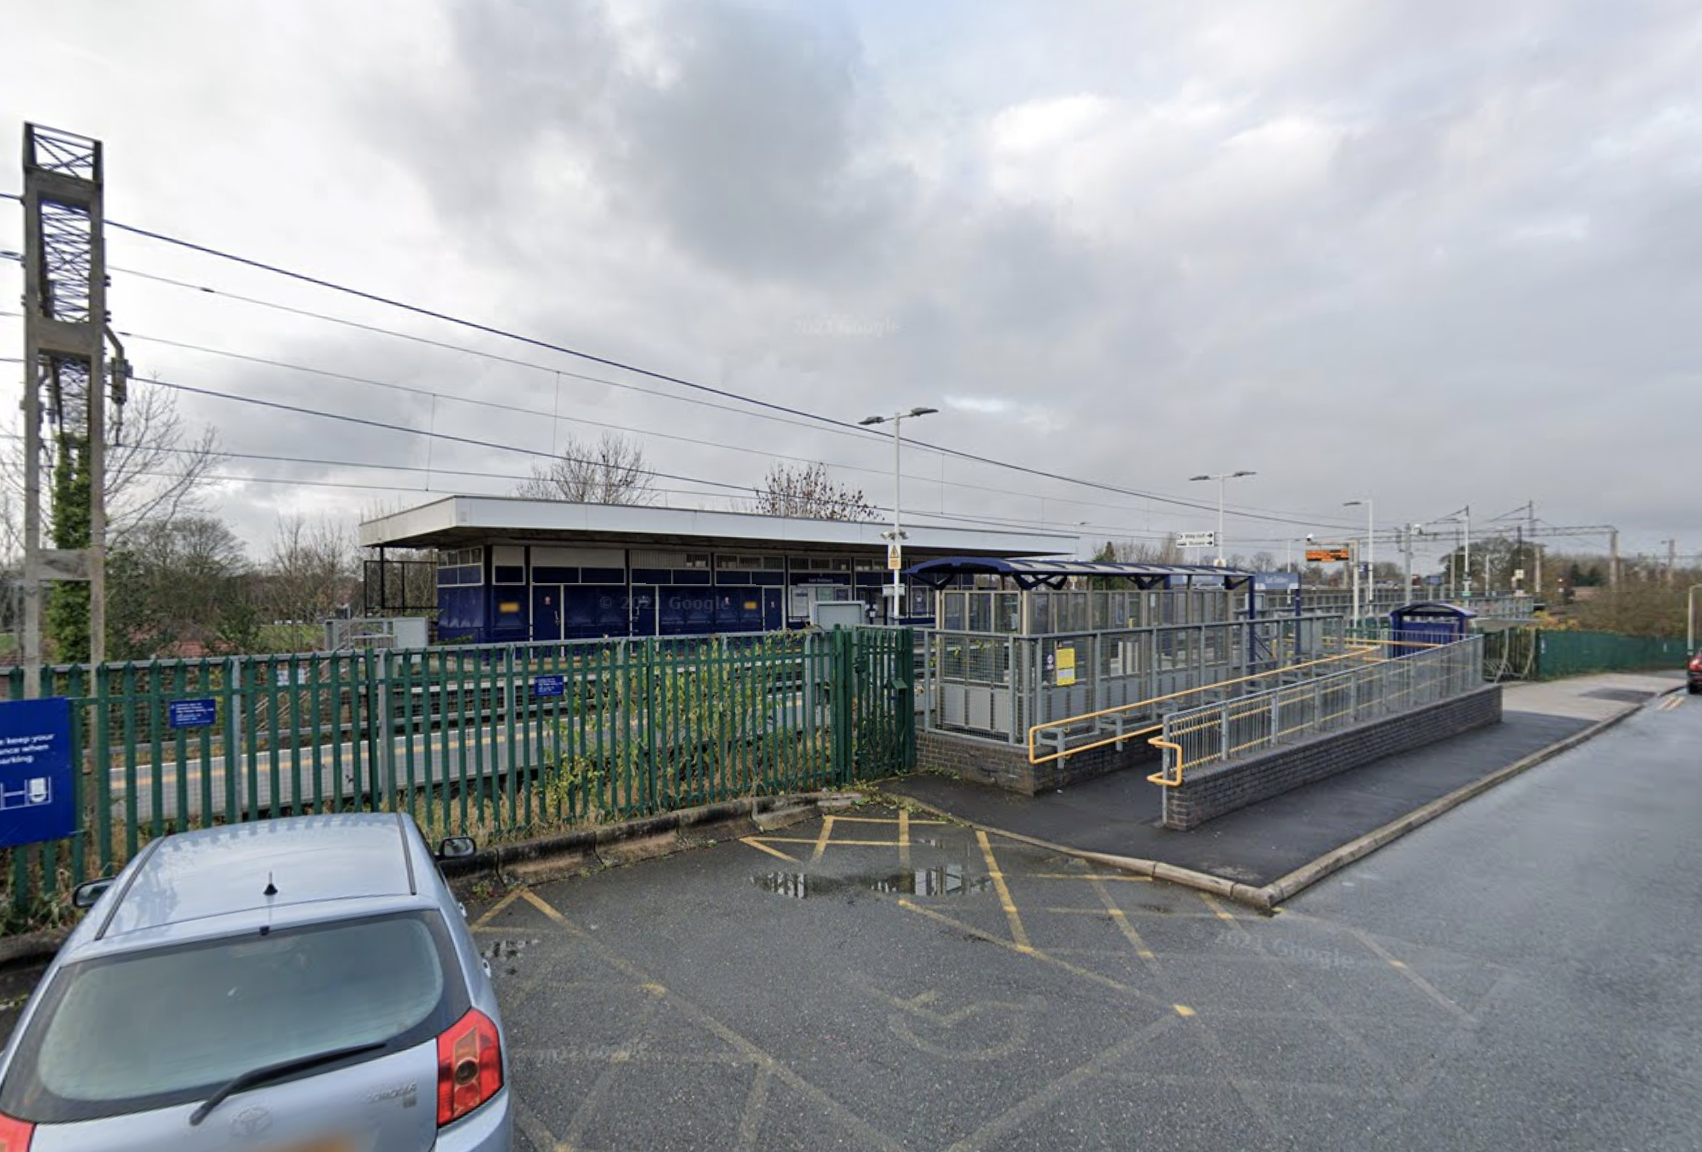 Urgent appeal to identify a woman who has died at East Didsbury station